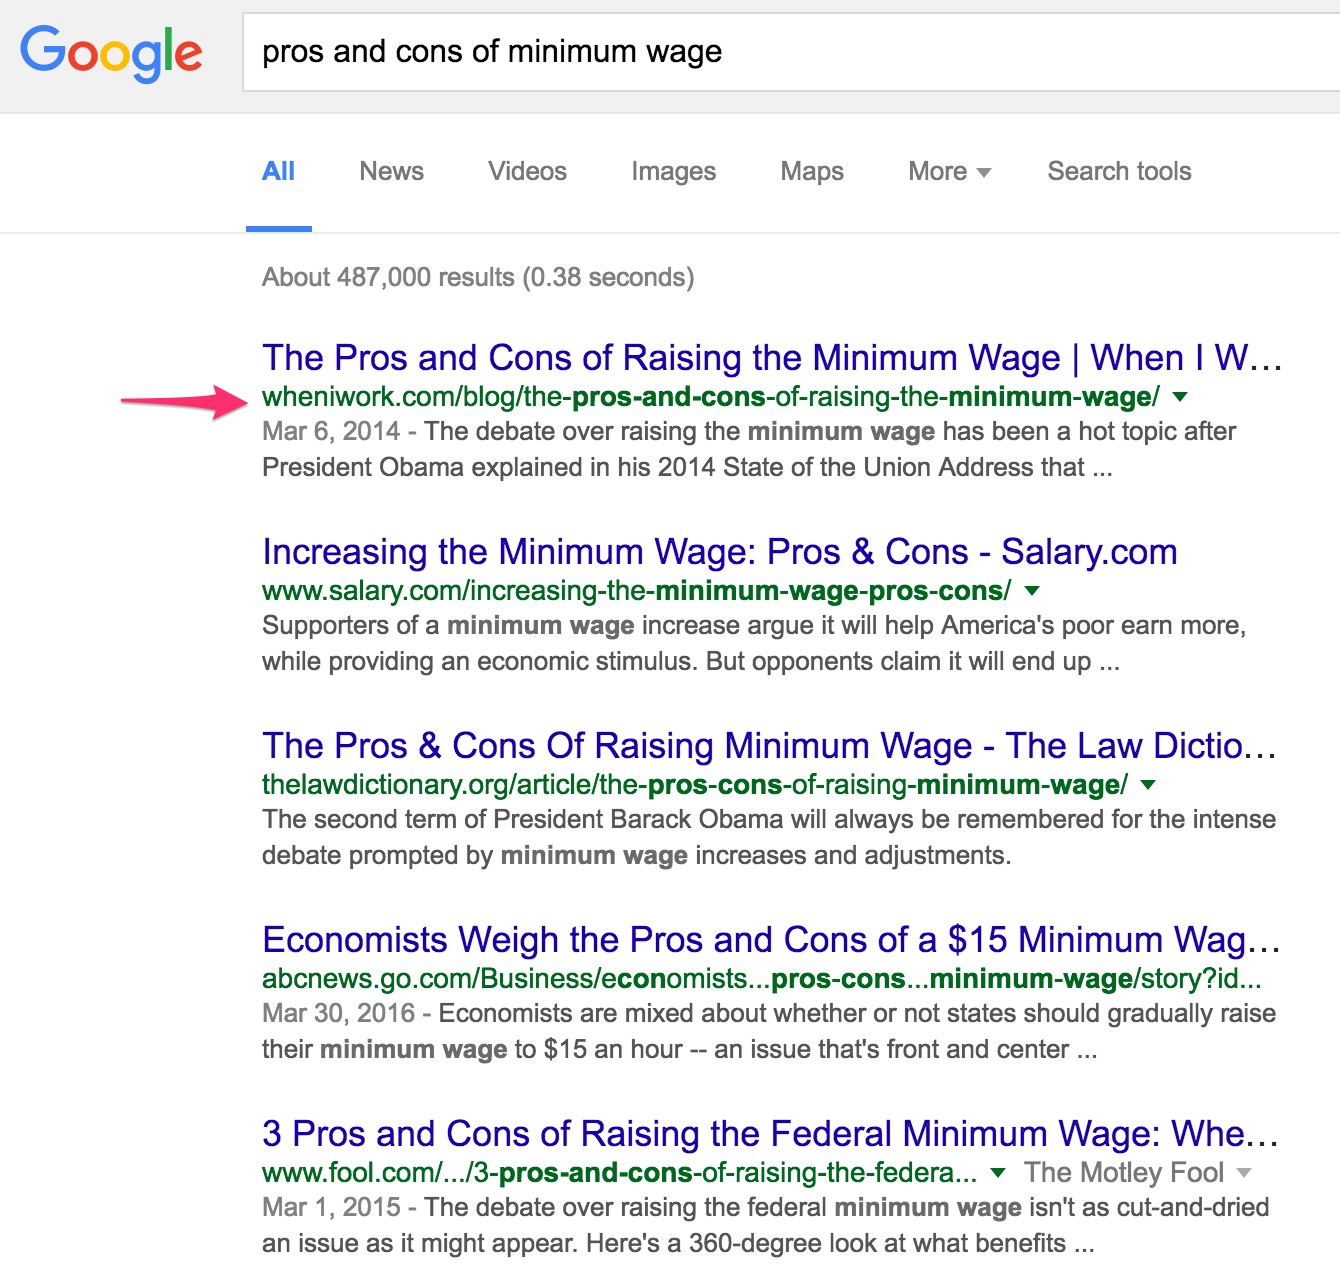 pros_and_cons_of_minimum_wage_-_Google_Search